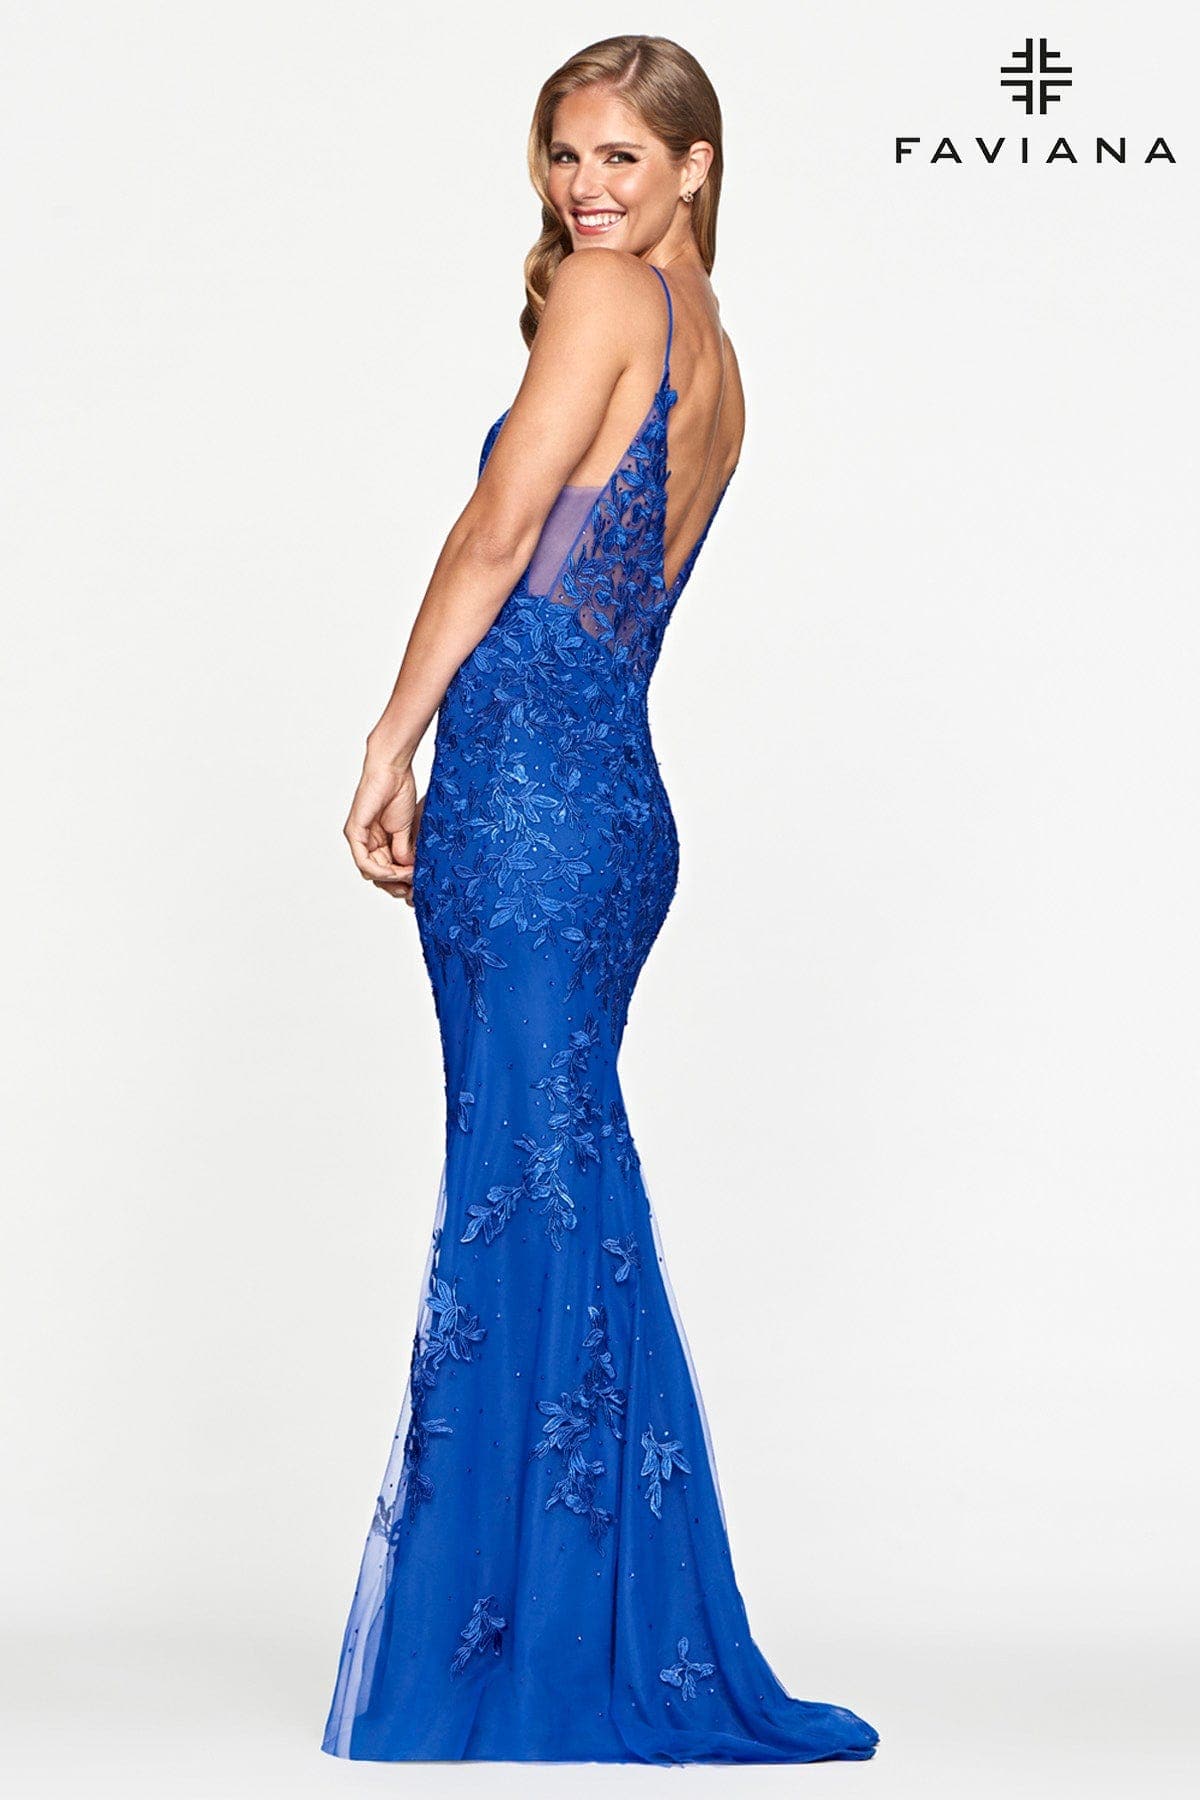 Lace Prom Dress With Deep V Neckline | S10509